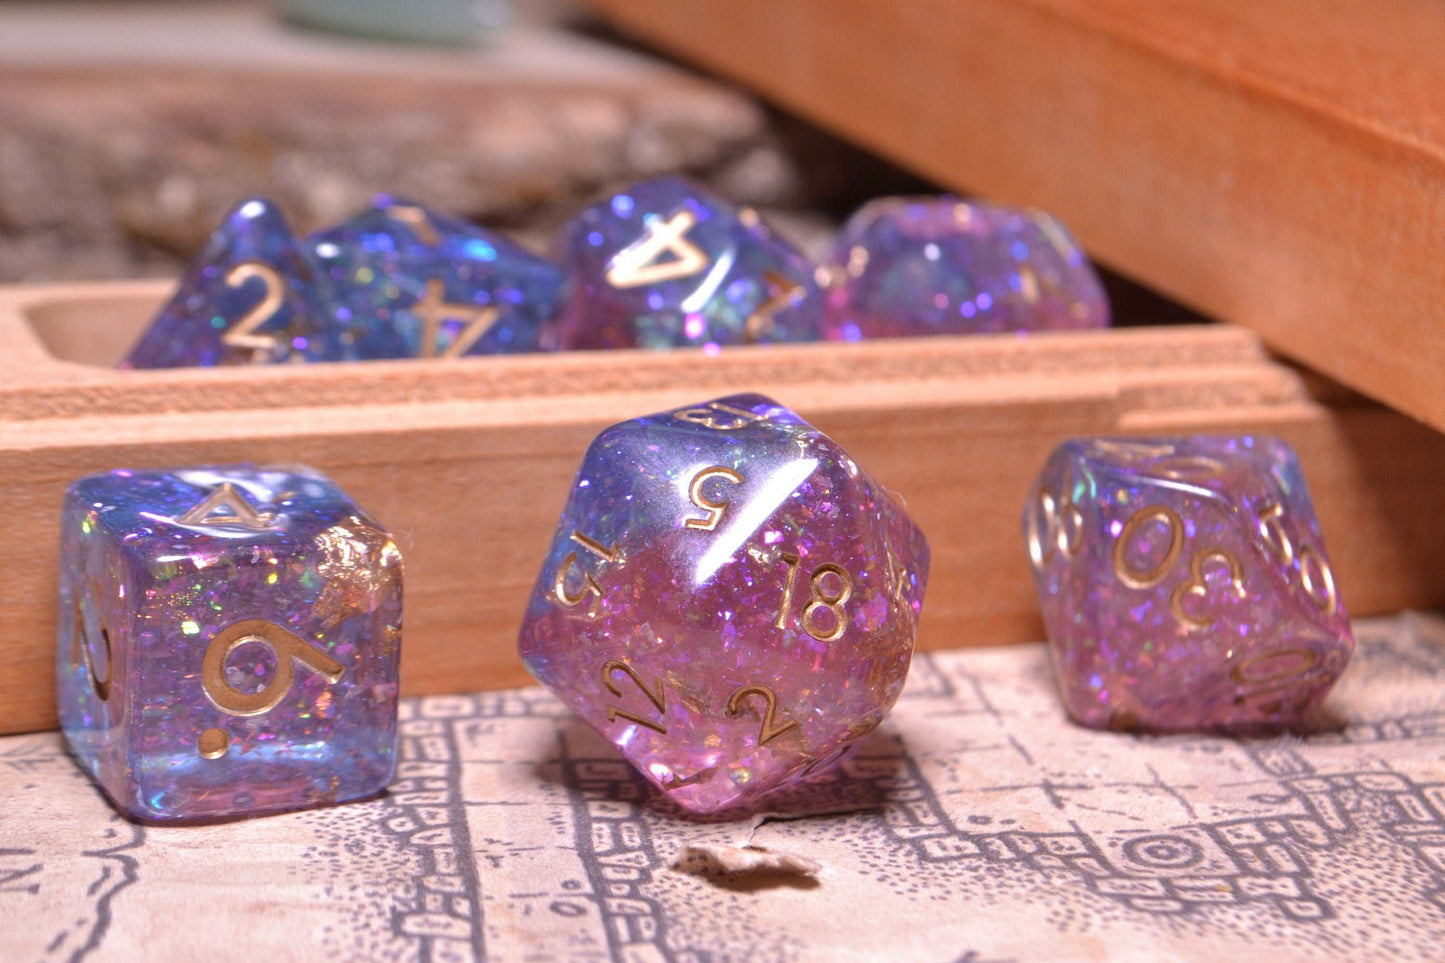 Nebula - Light Purple, Blue, Pink Soft Edge Resin D&D Dice Set With Metallic Gold Numbering - For Dungeons and Dragons